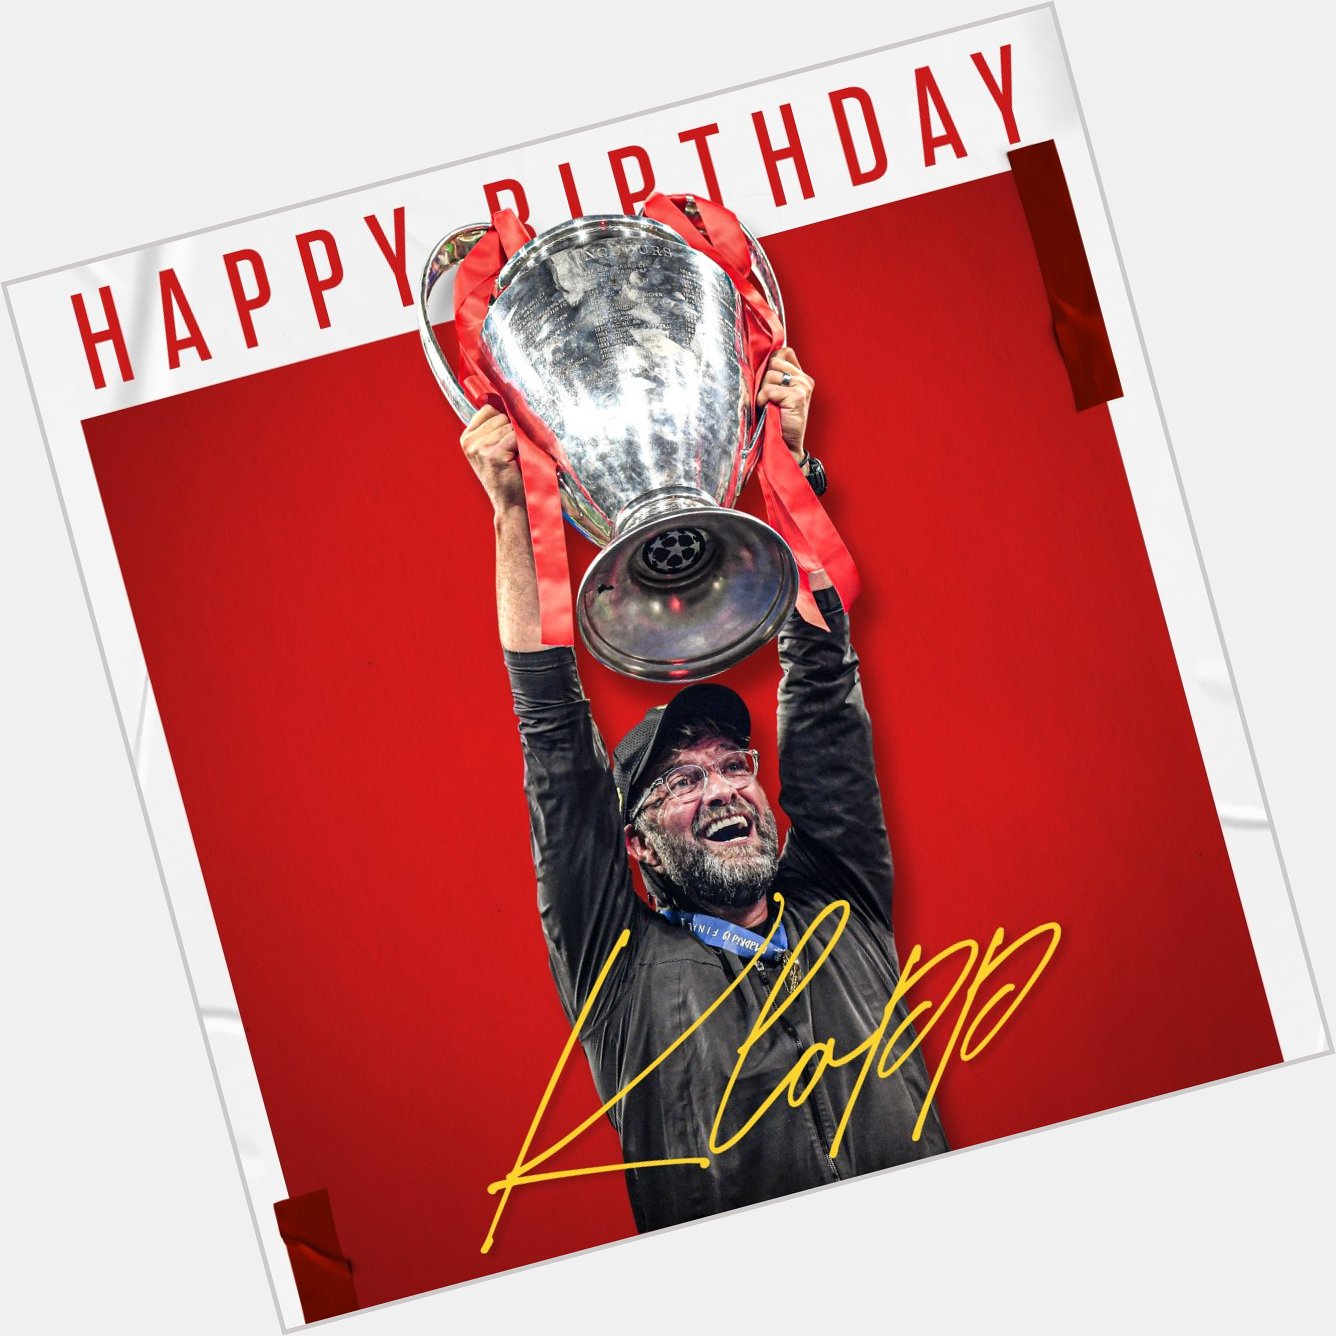 Happy birthday Jurgen klopp as we celebrate youth day in South Africa.. 